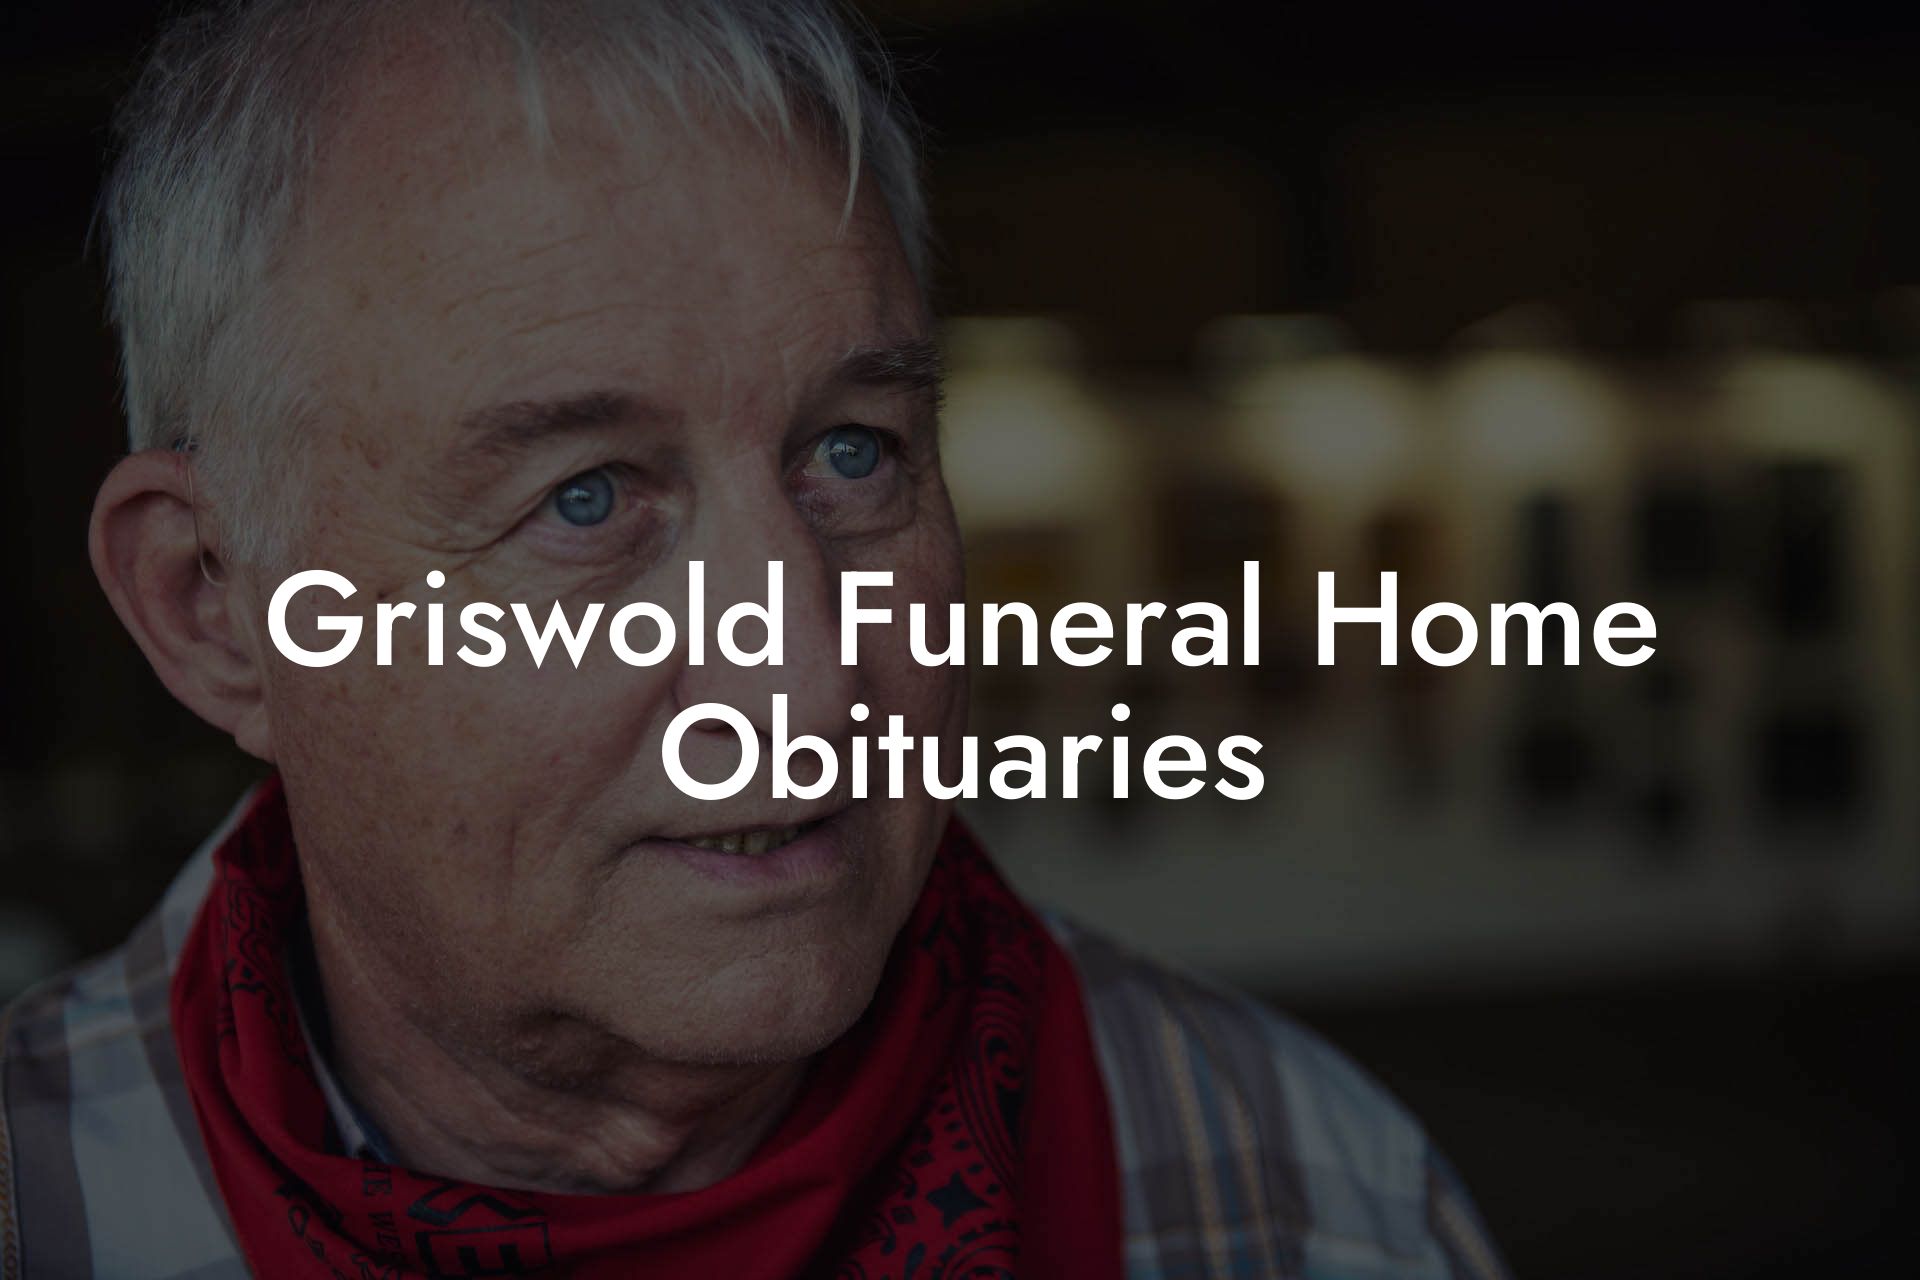 Griswold Funeral Home Obituaries